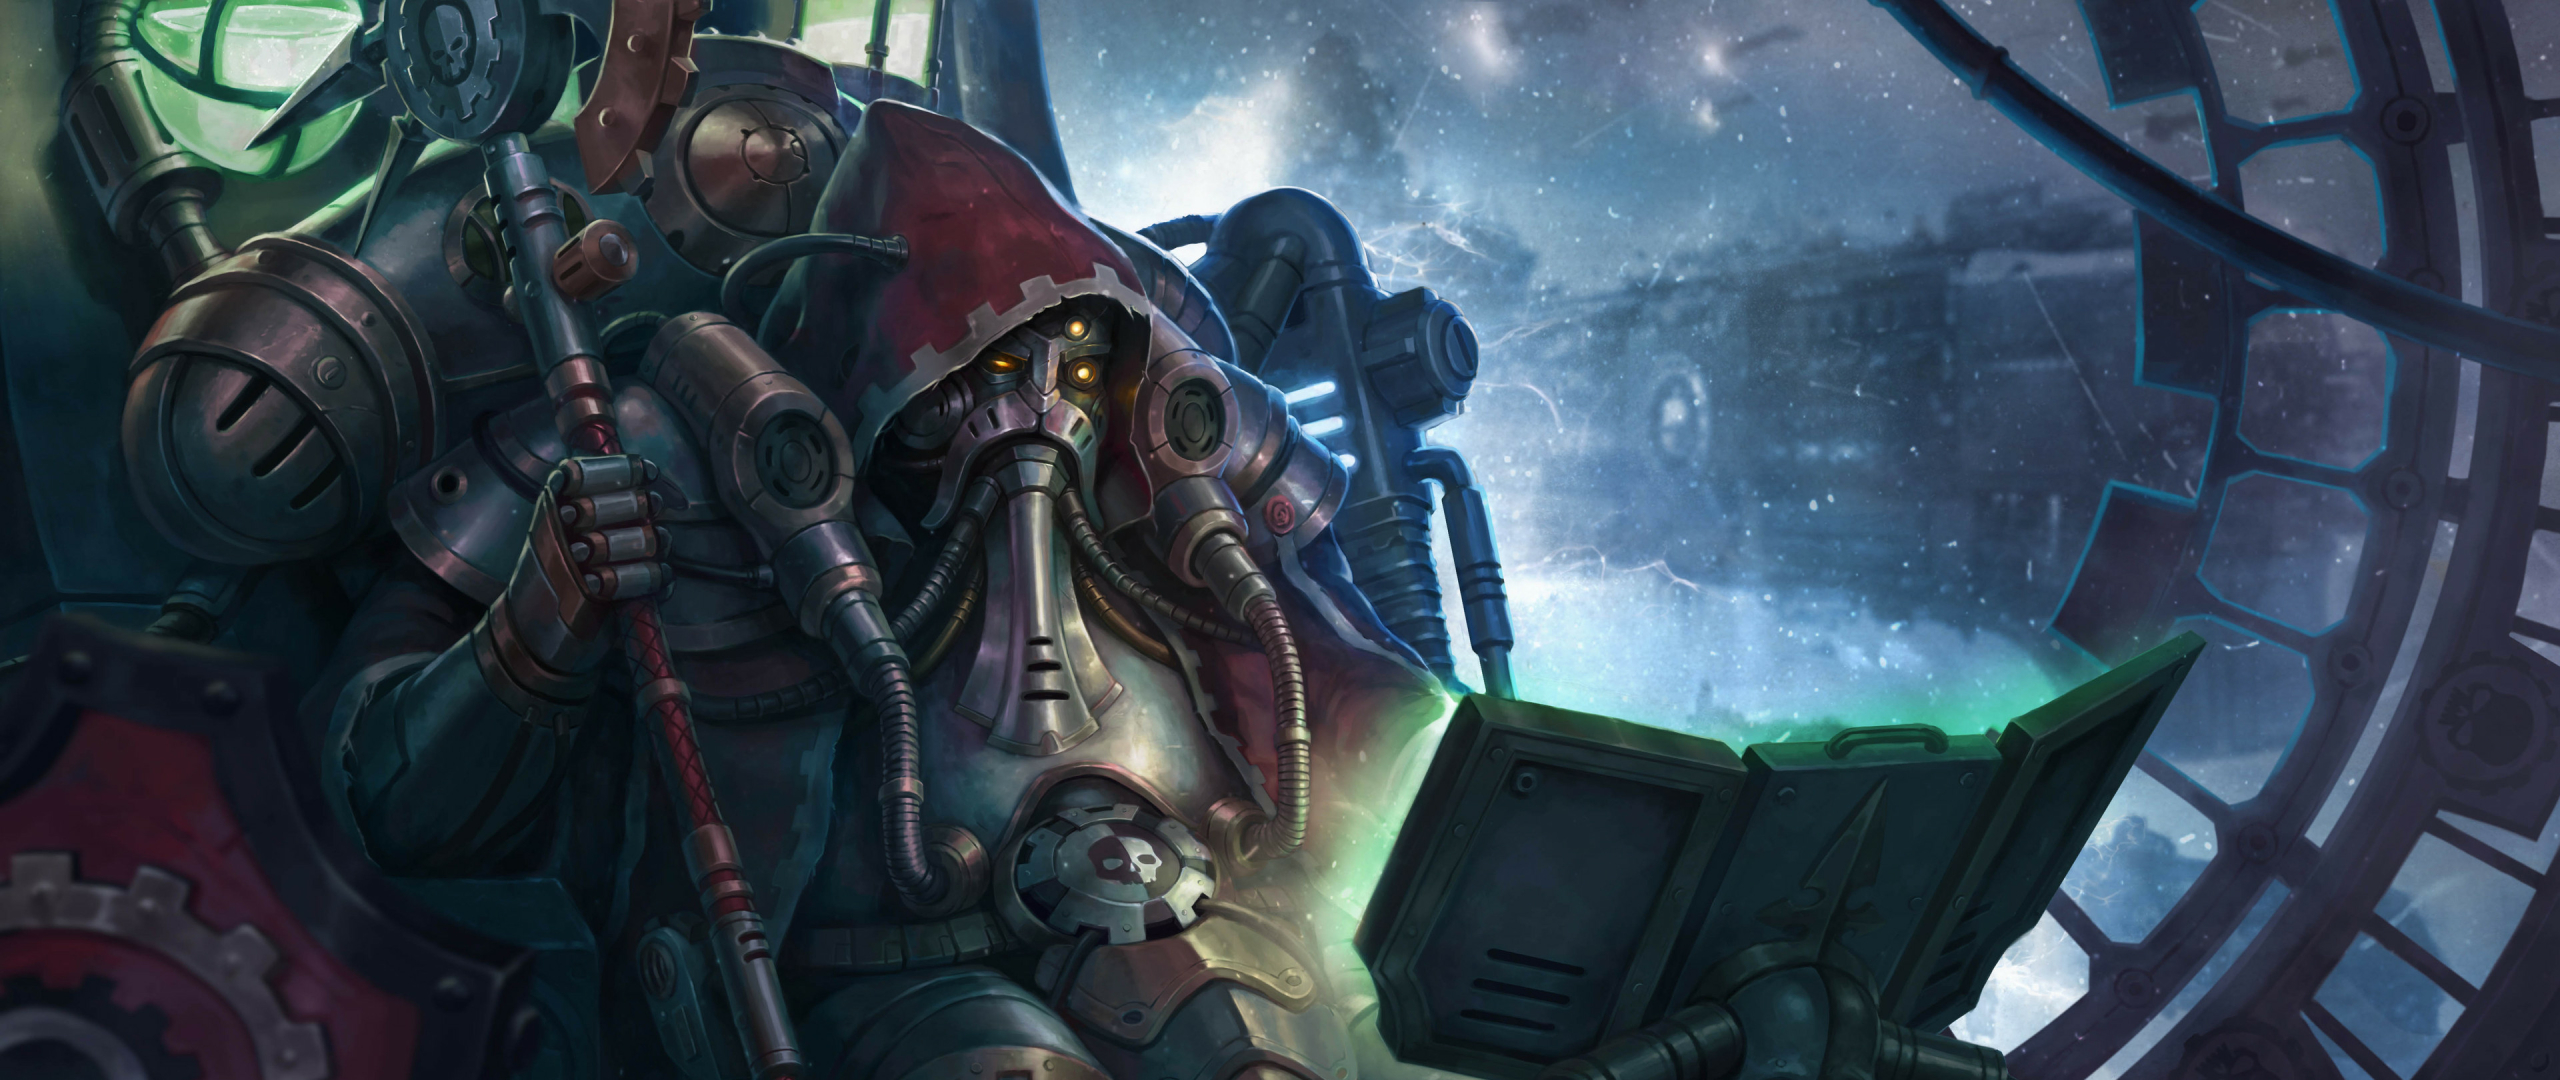 General 2560x1080 Warhammer 30,000 Warhammer 40,000 Warhammer space marines science fiction technology space Adeptus Mechanicus spaceship cyborg robot robotic staff armor video games video game characters